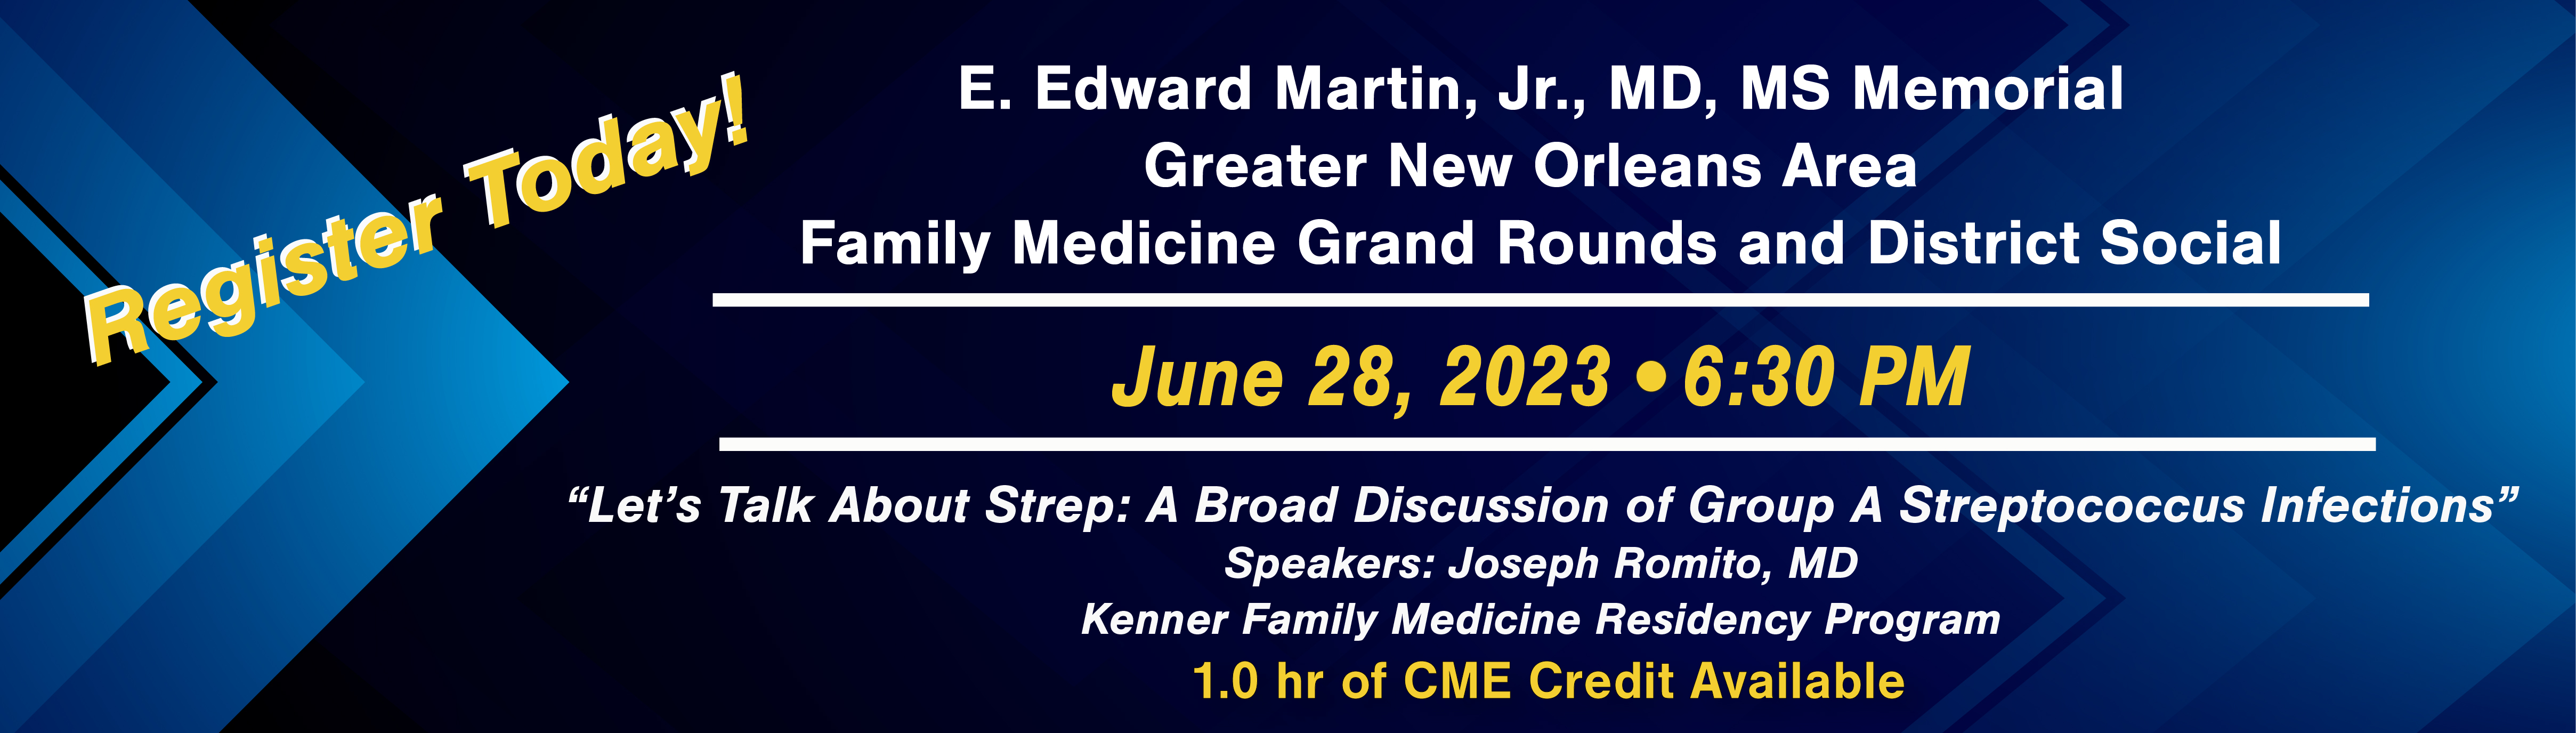 Grand Rounds web banner Register Today 01